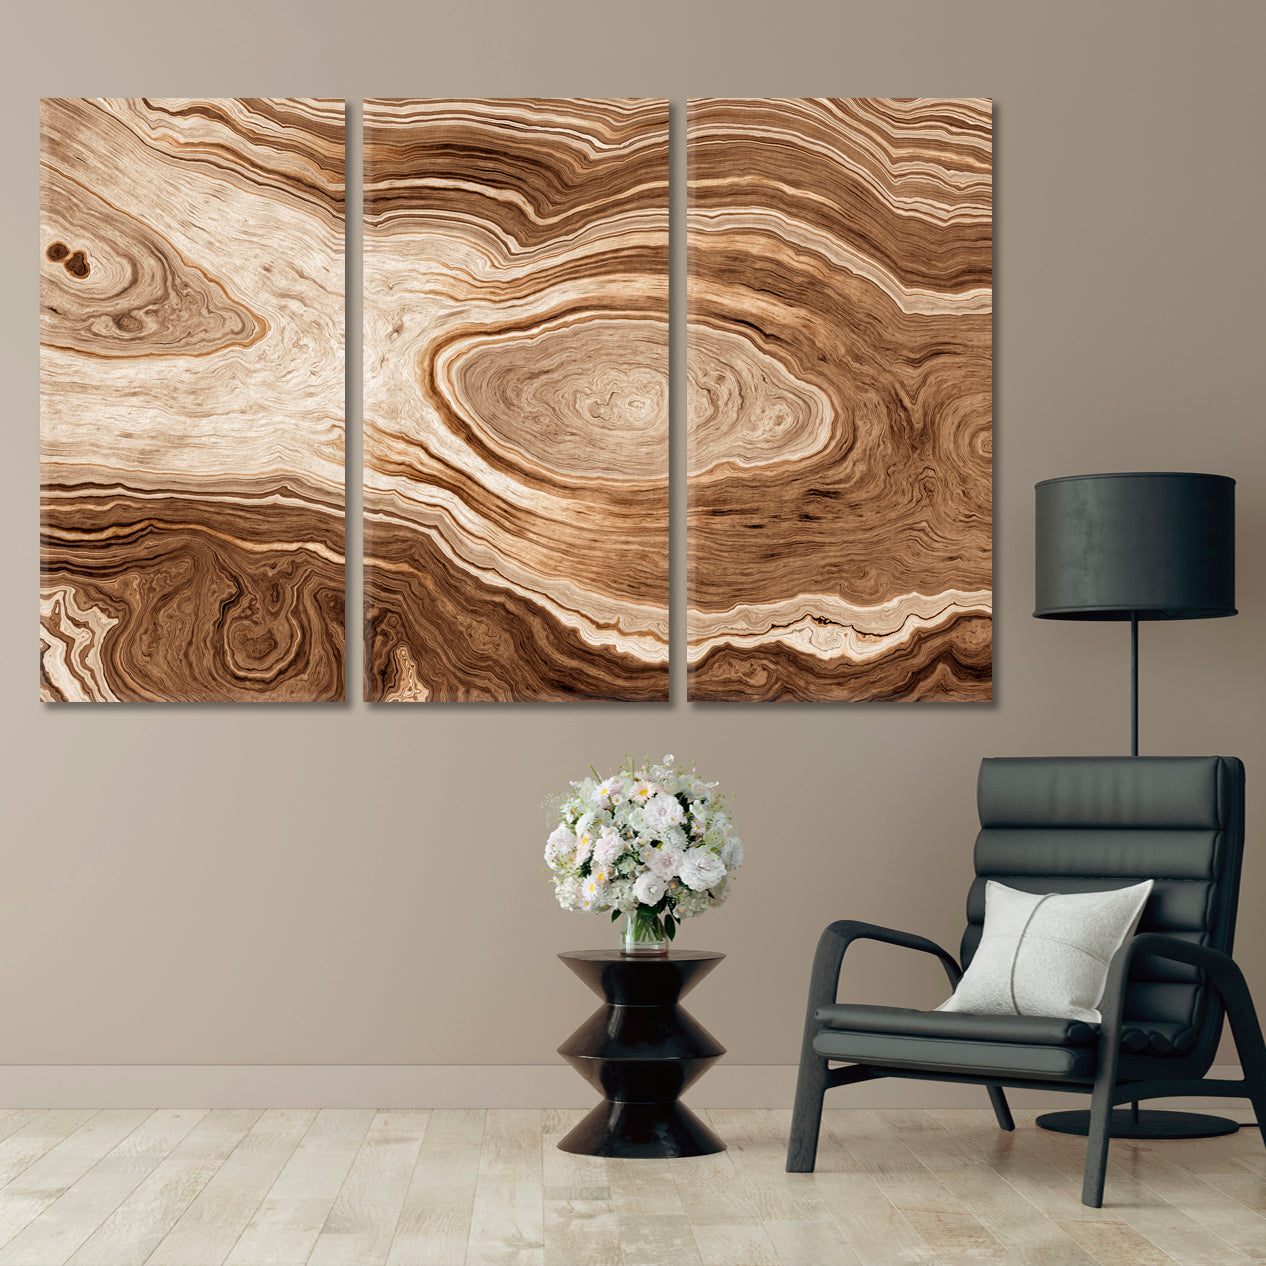 ABSTRACT Wavy Lines Age Growth Rings Oak Big Tree Trunk Slice Cut Woods Abstract Art Print Artesty 3 panels 36" x 24" 